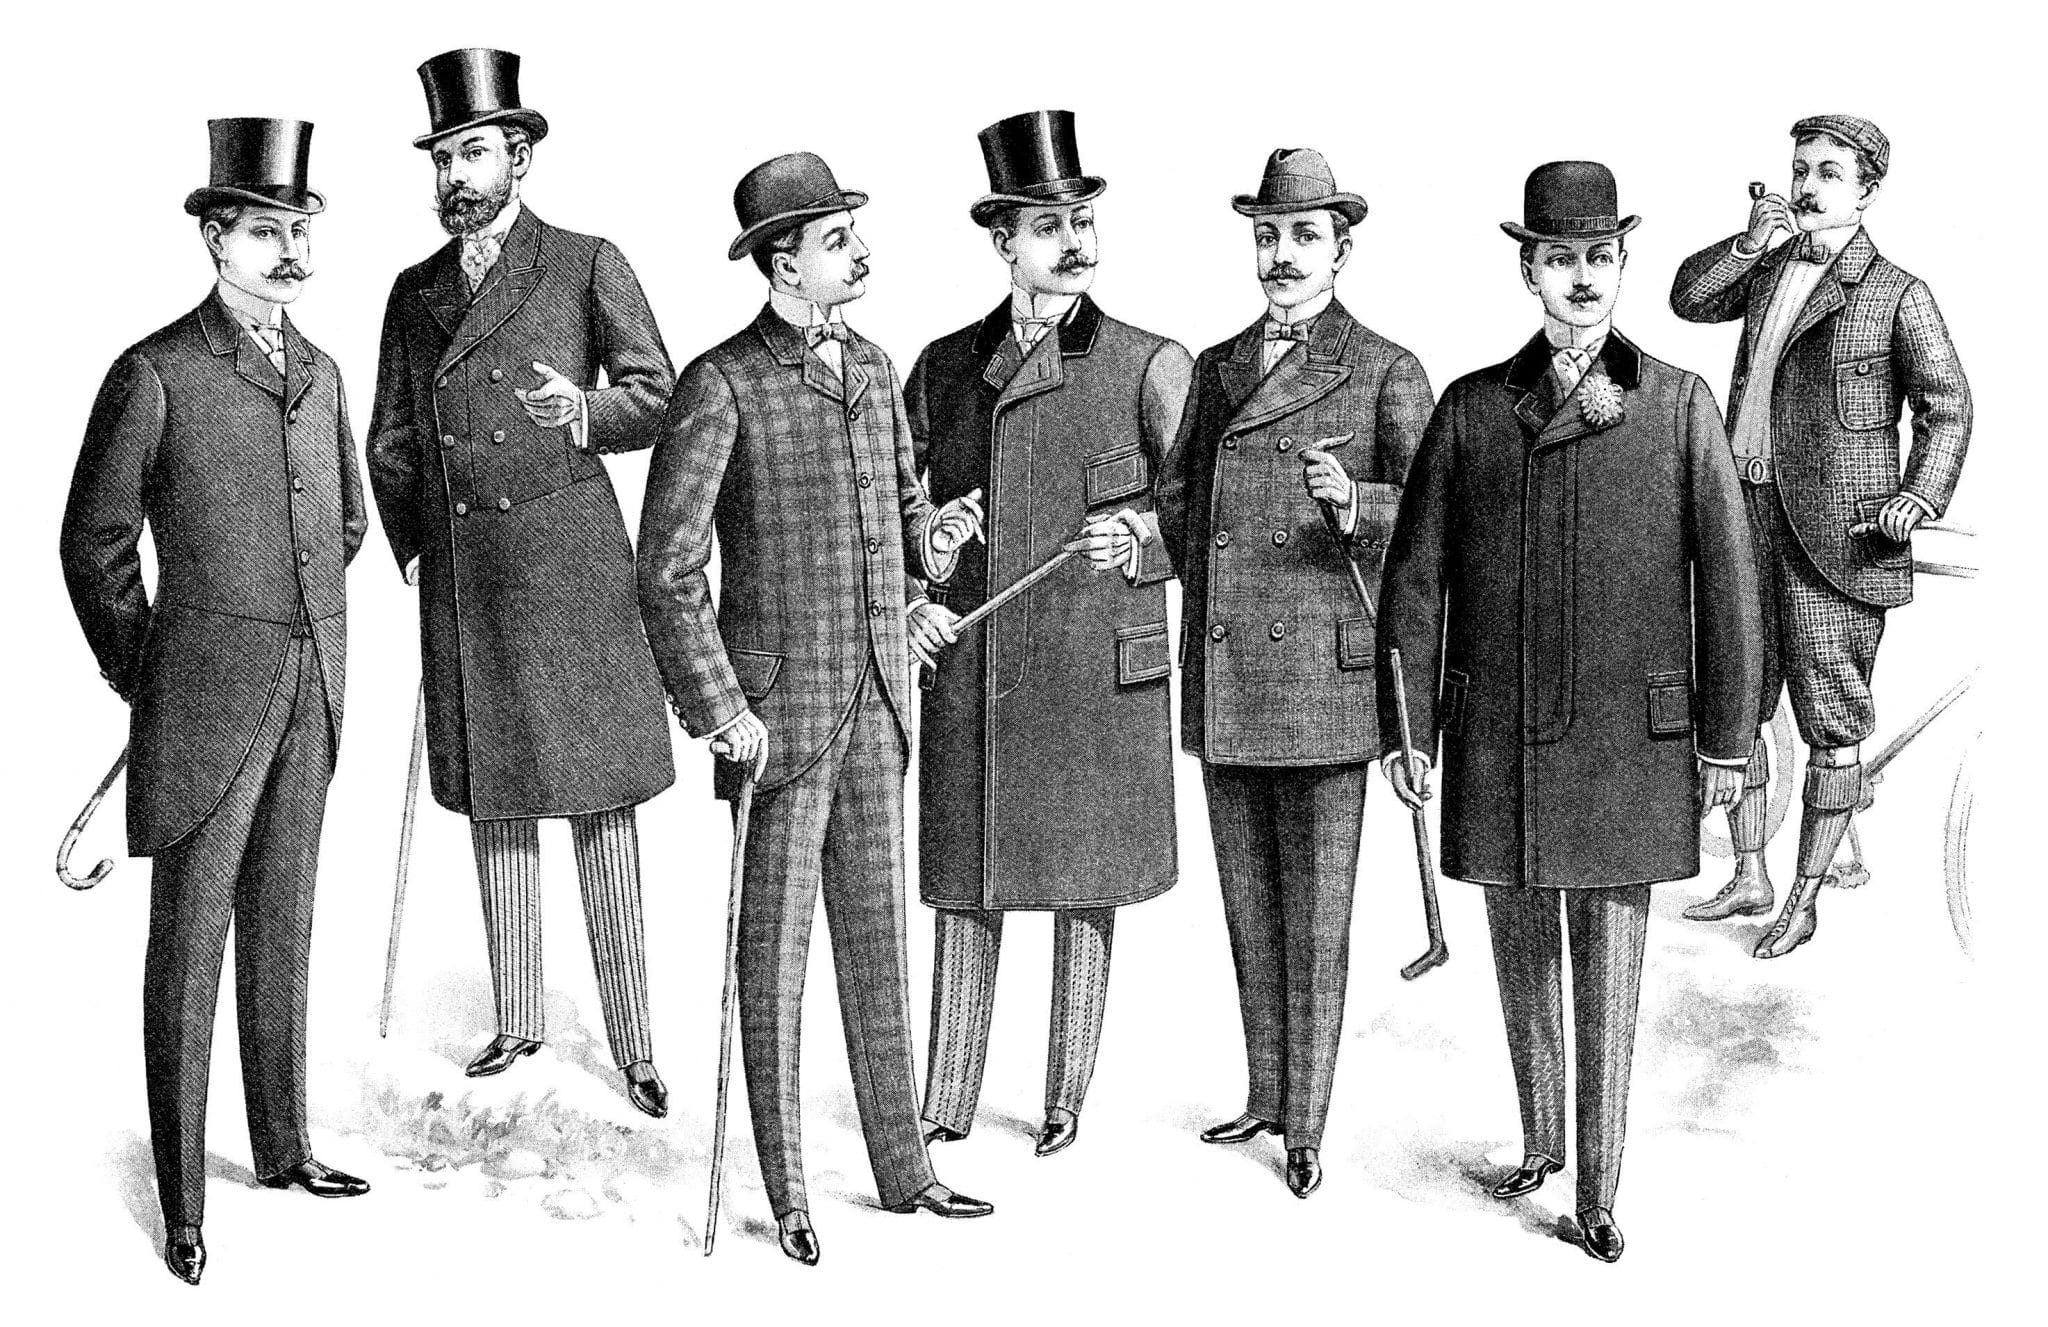 Men in the Victorian Era wearing jackets and trousers